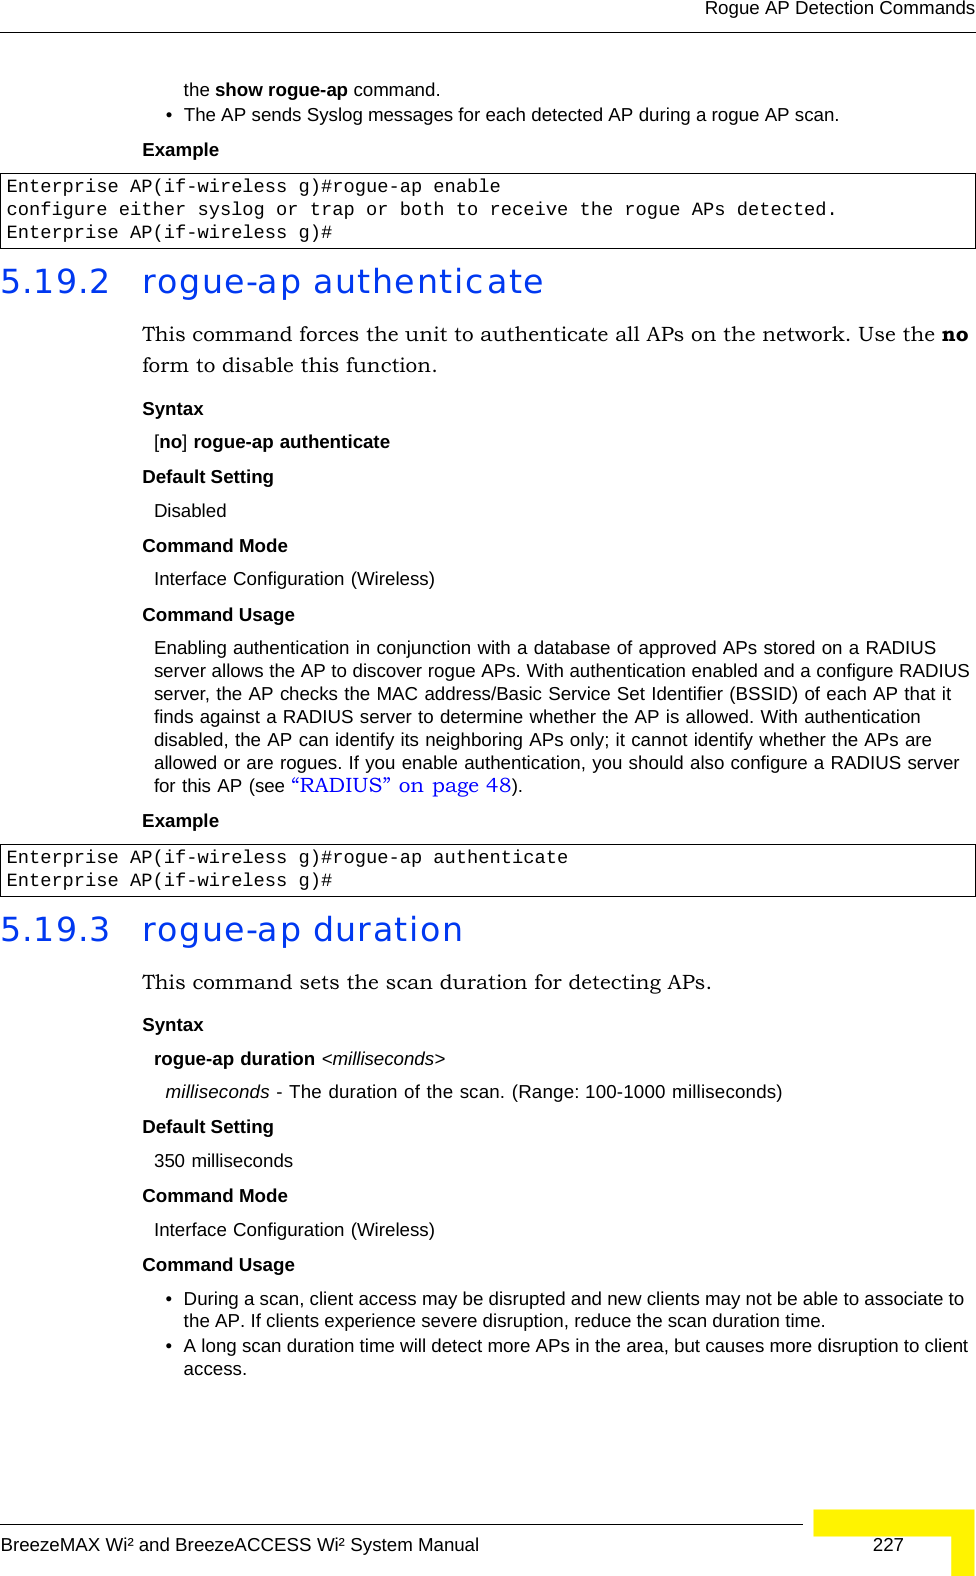 Rogue AP Detection CommandsBreezeMAX Wi² and BreezeACCESS Wi² System Manual  227the show rogue-ap command.• The AP sends Syslog messages for each detected AP during a rogue AP scan.Example 5.19.2 rogue-ap authenticateThis command forces the unit to authenticate all APs on the network. Use the no form to disable this function.Syntax[no] rogue-ap authenticateDefault SettingDisabledCommand Mode Interface Configuration (Wireless)Command Usage Enabling authentication in conjunction with a database of approved APs stored on a RADIUS server allows the AP to discover rogue APs. With authentication enabled and a configure RADIUS server, the AP checks the MAC address/Basic Service Set Identifier (BSSID) of each AP that it finds against a RADIUS server to determine whether the AP is allowed. With authentication disabled, the AP can identify its neighboring APs only; it cannot identify whether the APs are allowed or are rogues. If you enable authentication, you should also configure a RADIUS server for this AP (see “RADIUS” on page 48).Example 5.19.3 rogue-ap durationThis command sets the scan duration for detecting APs.Syntaxrogue-ap duration &lt;milliseconds&gt;milliseconds - The duration of the scan. (Range: 100-1000 milliseconds)Default Setting350 millisecondsCommand Mode Interface Configuration (Wireless)Command Usage • During a scan, client access may be disrupted and new clients may not be able to associate to the AP. If clients experience severe disruption, reduce the scan duration time.• A long scan duration time will detect more APs in the area, but causes more disruption to client access.Enterprise AP(if-wireless g)#rogue-ap enableconfigure either syslog or trap or both to receive the rogue APs detected.Enterprise AP(if-wireless g)#Enterprise AP(if-wireless g)#rogue-ap authenticateEnterprise AP(if-wireless g)#